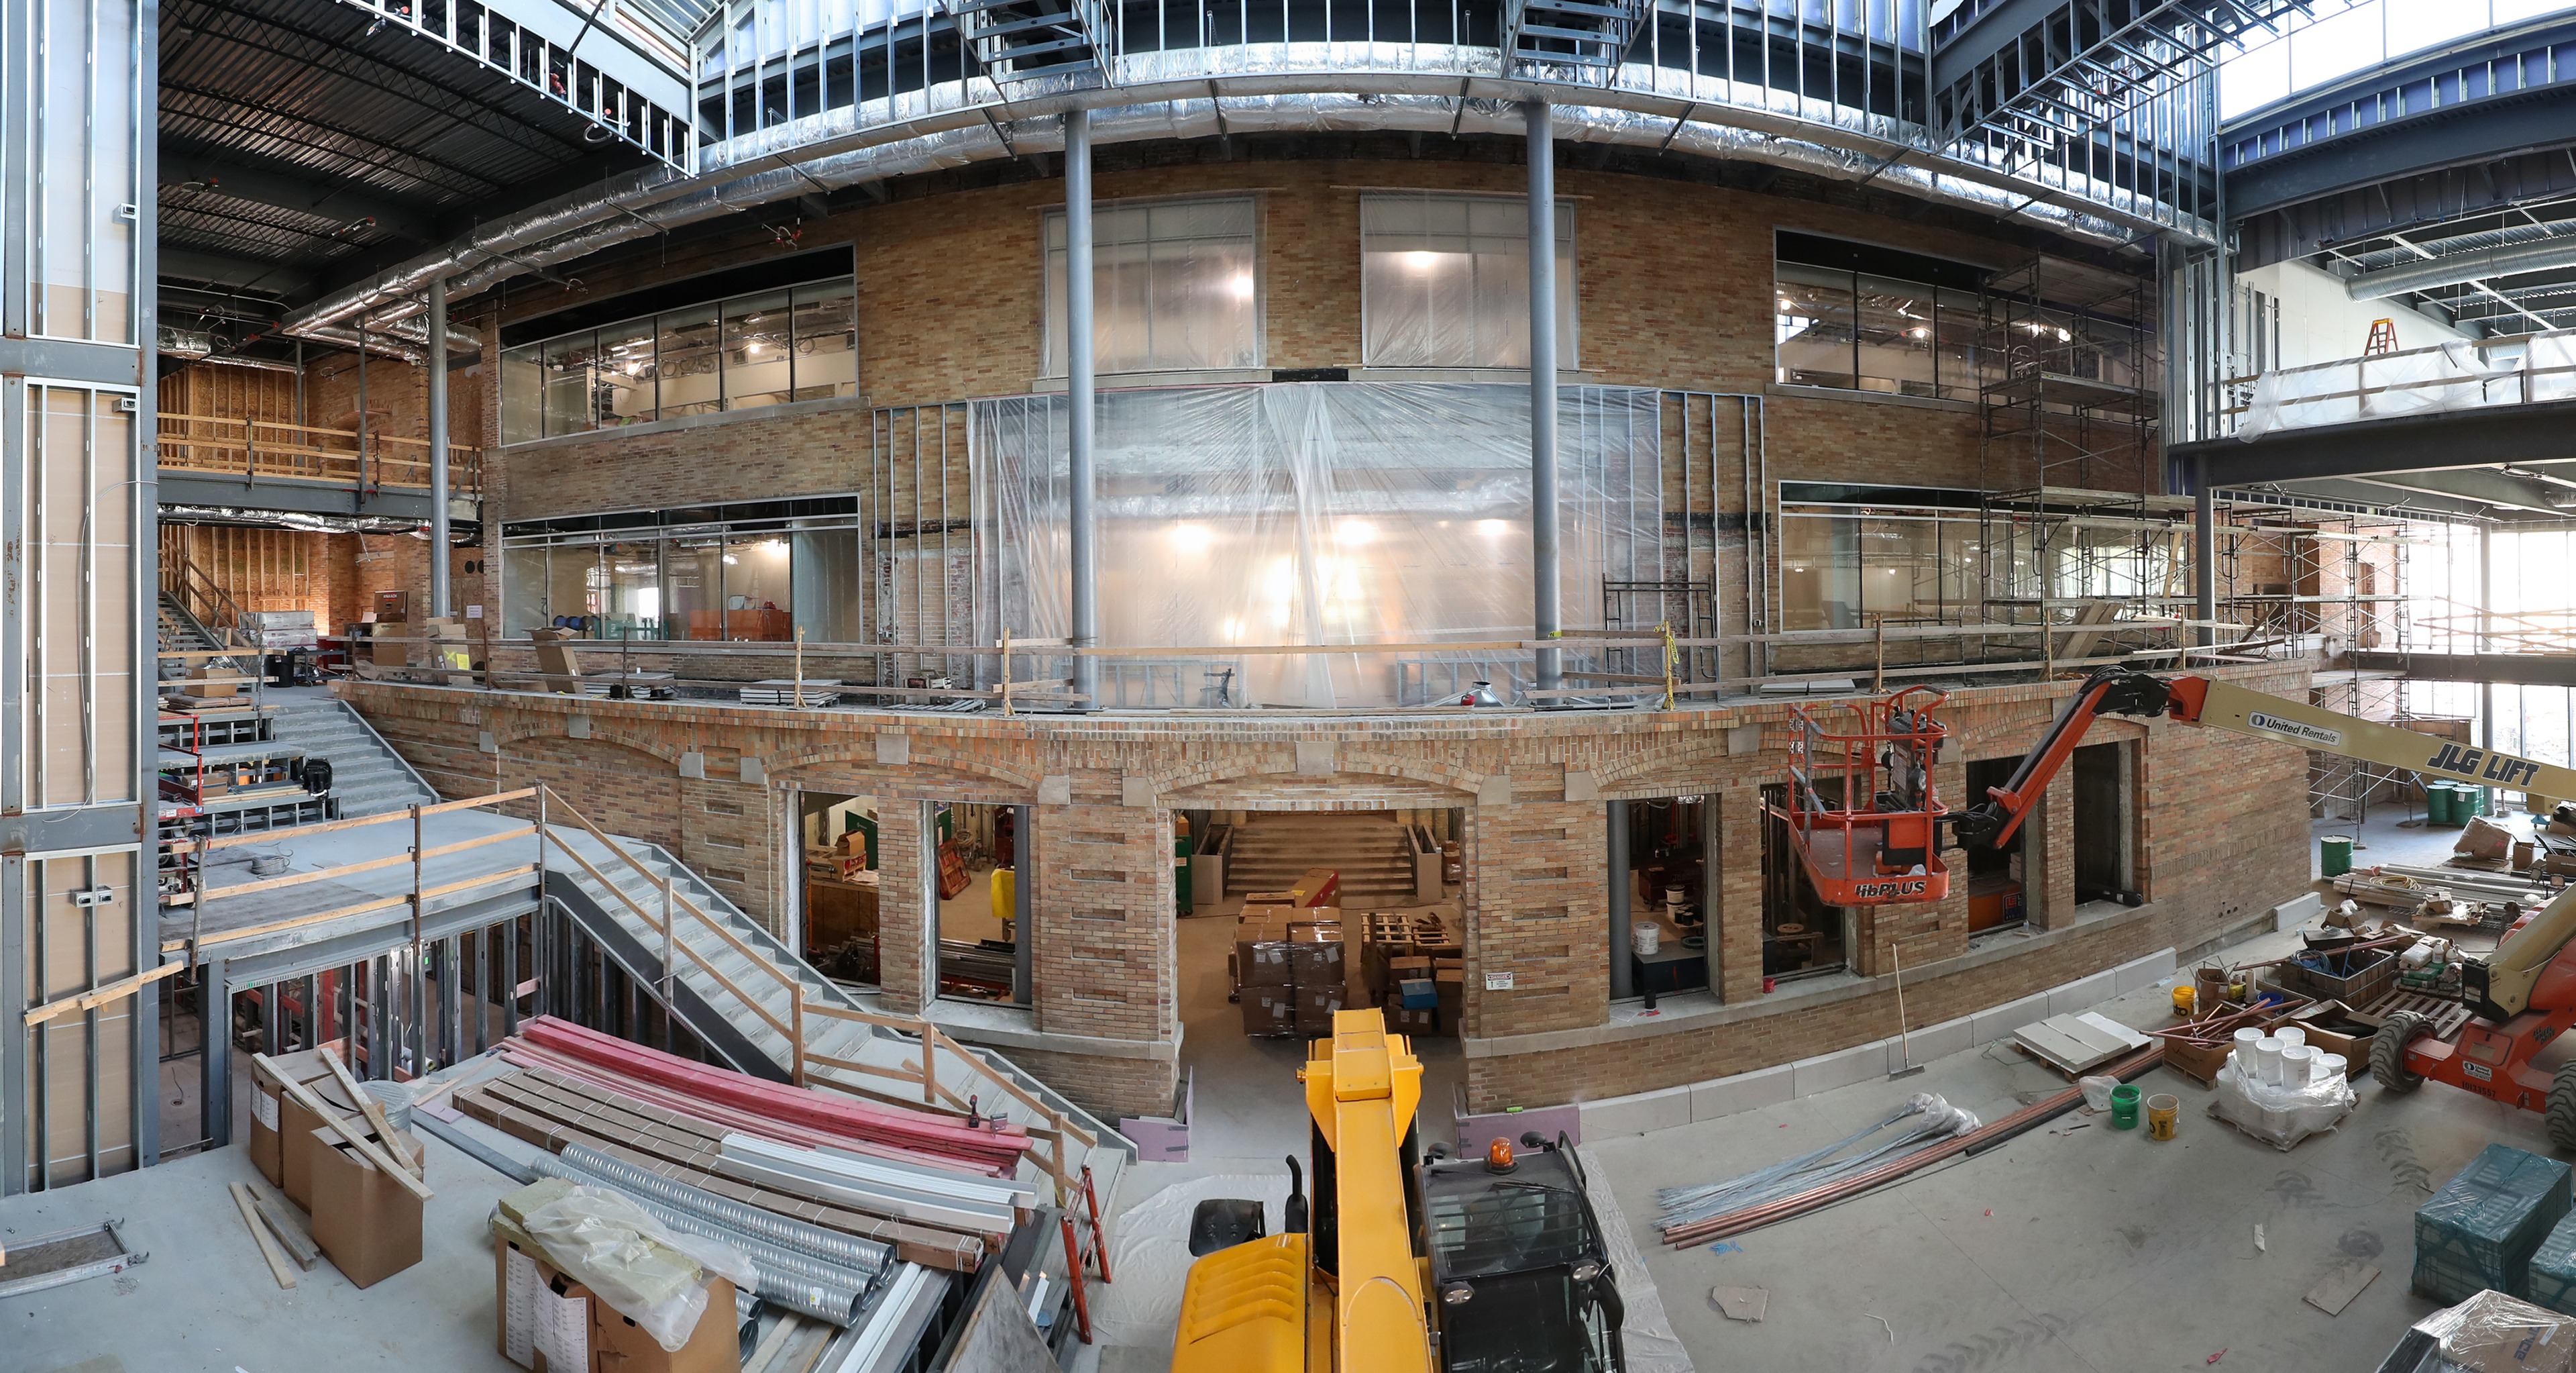 Mid-construction image of the BGSU campus building project in the Allen W. and Carol M. Schmidthorst College of Business